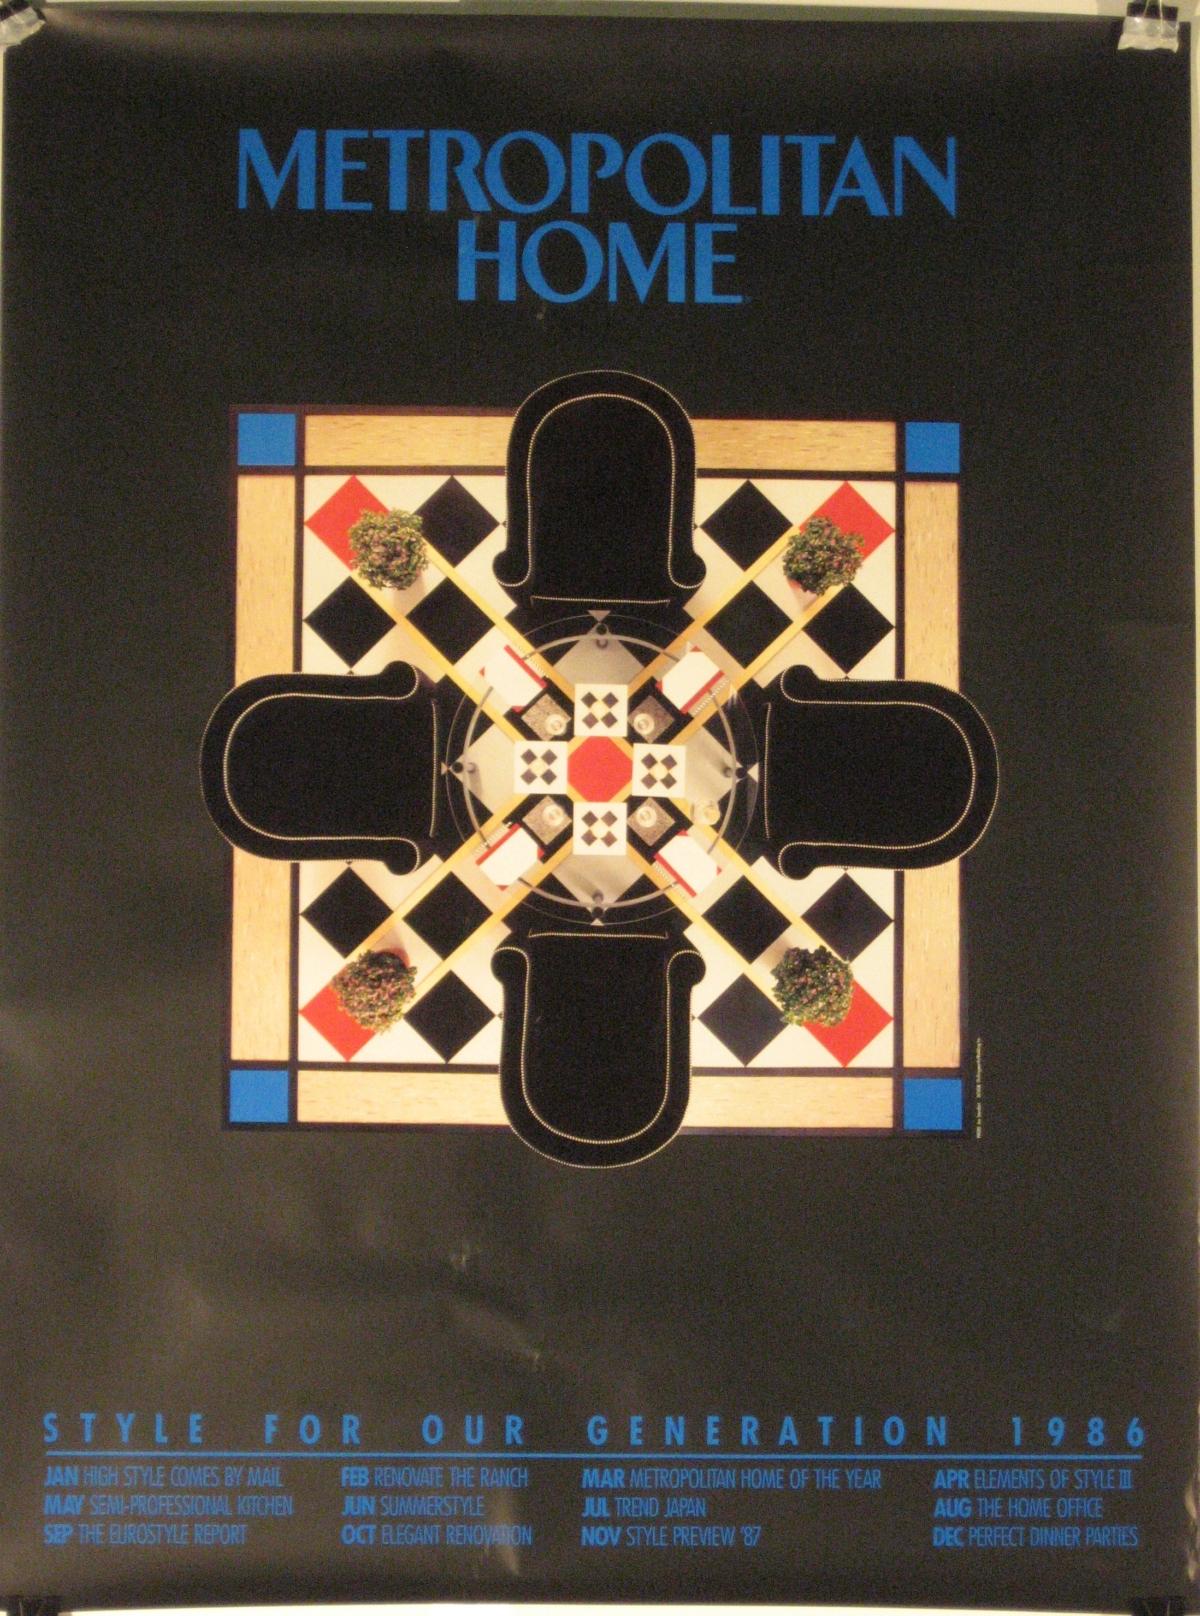 Artist: Anonymous

Date of Origin: 1986

Size: 30” x 40”

 

Geometric design advertising Metropolitan Home Magazine. The magazine was launched in 1974 as Apartment Life. It focused primarily on urban lifestyles. In 1981, the publisher rebranded it